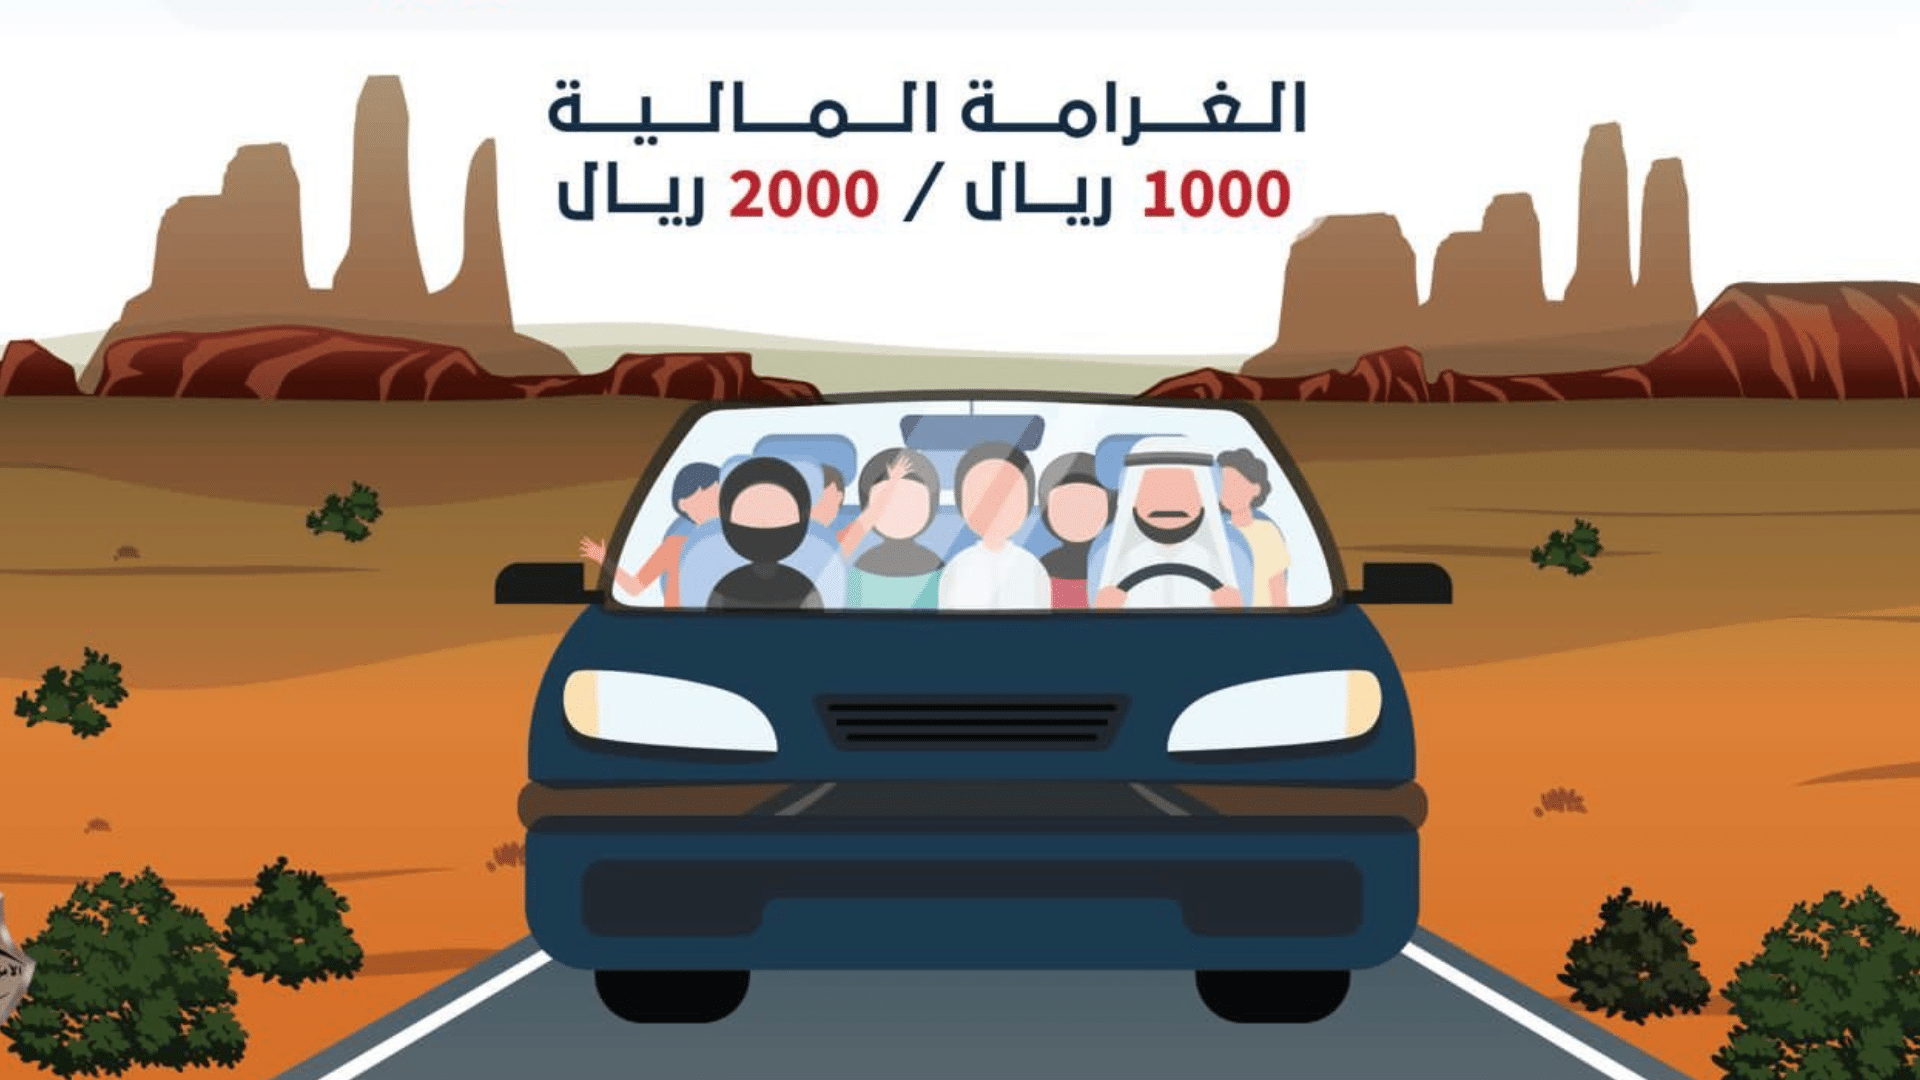 Overcrowd Your Vehicle? SAR 2,000 Could Be the Price in Saudi Arabia